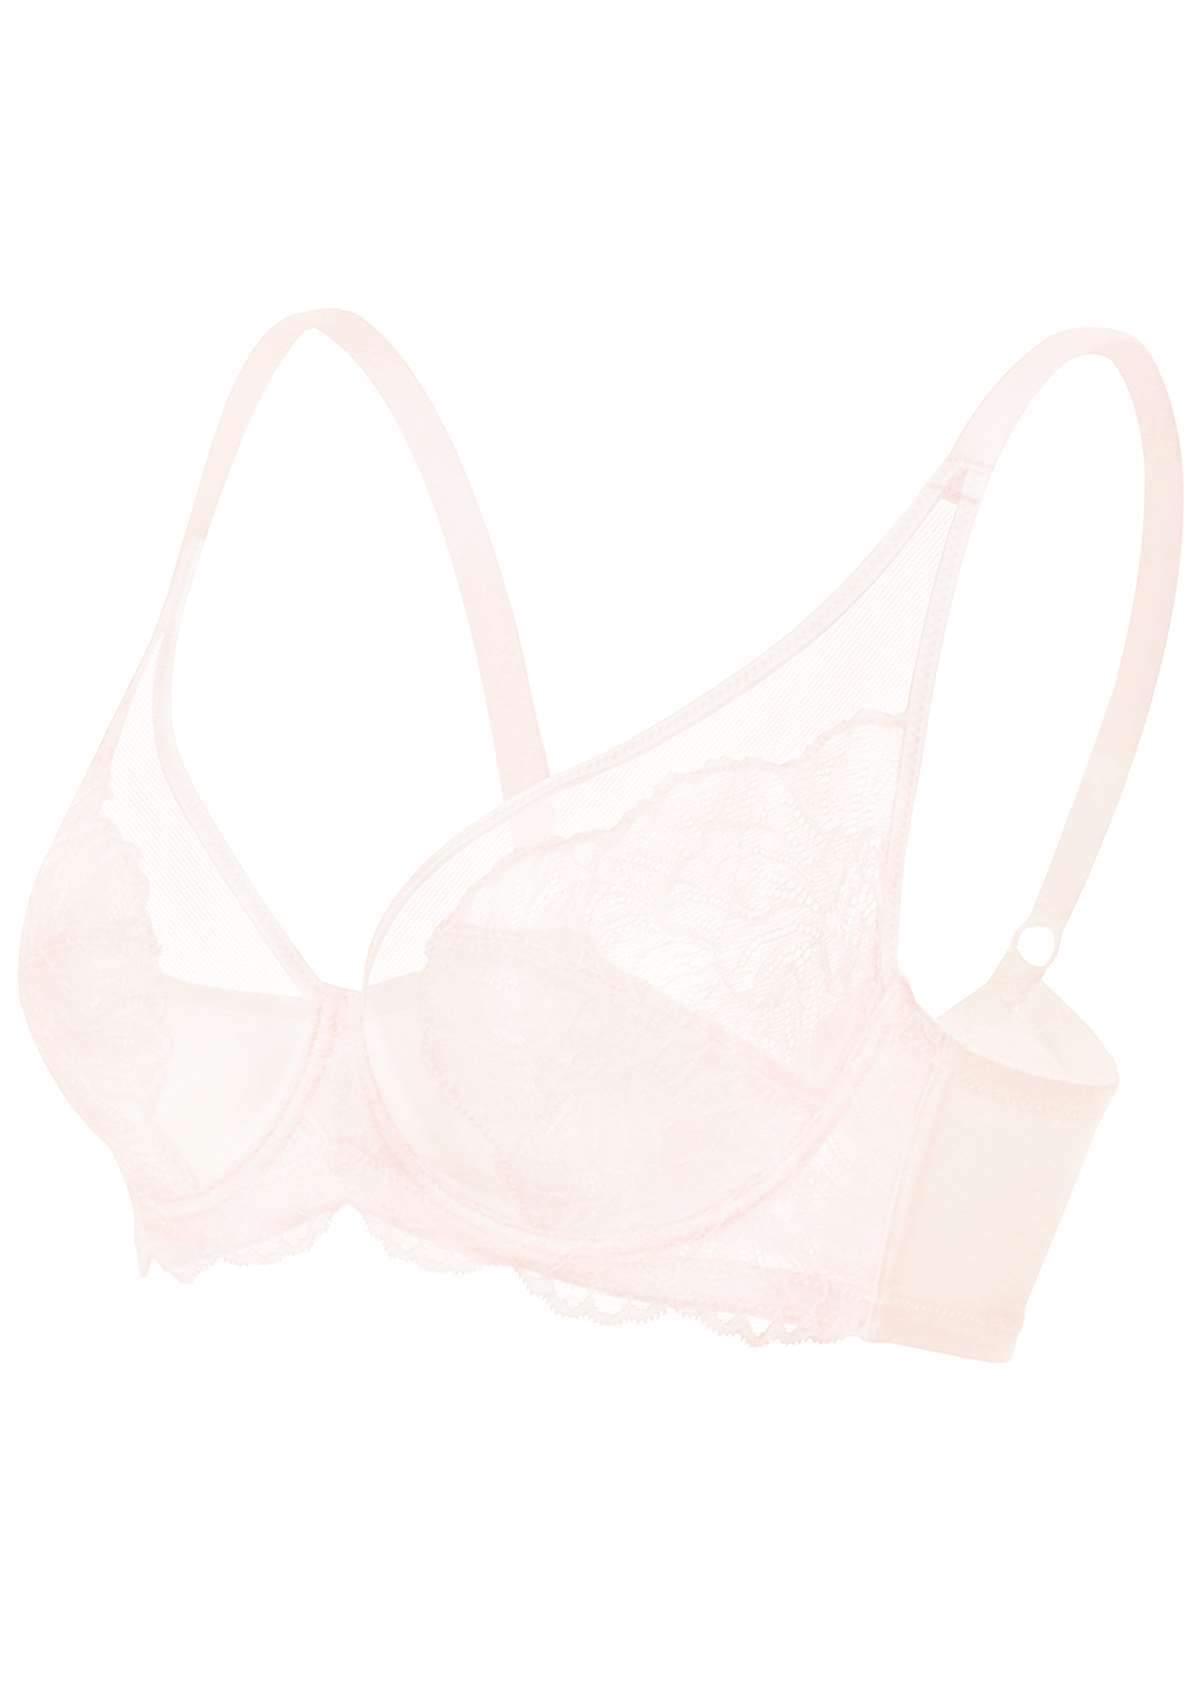 HSIA Blossom Sheer Lace Bra: Comfortable Underwire Bra For Big Busts - Dusty Peach / 34 / G